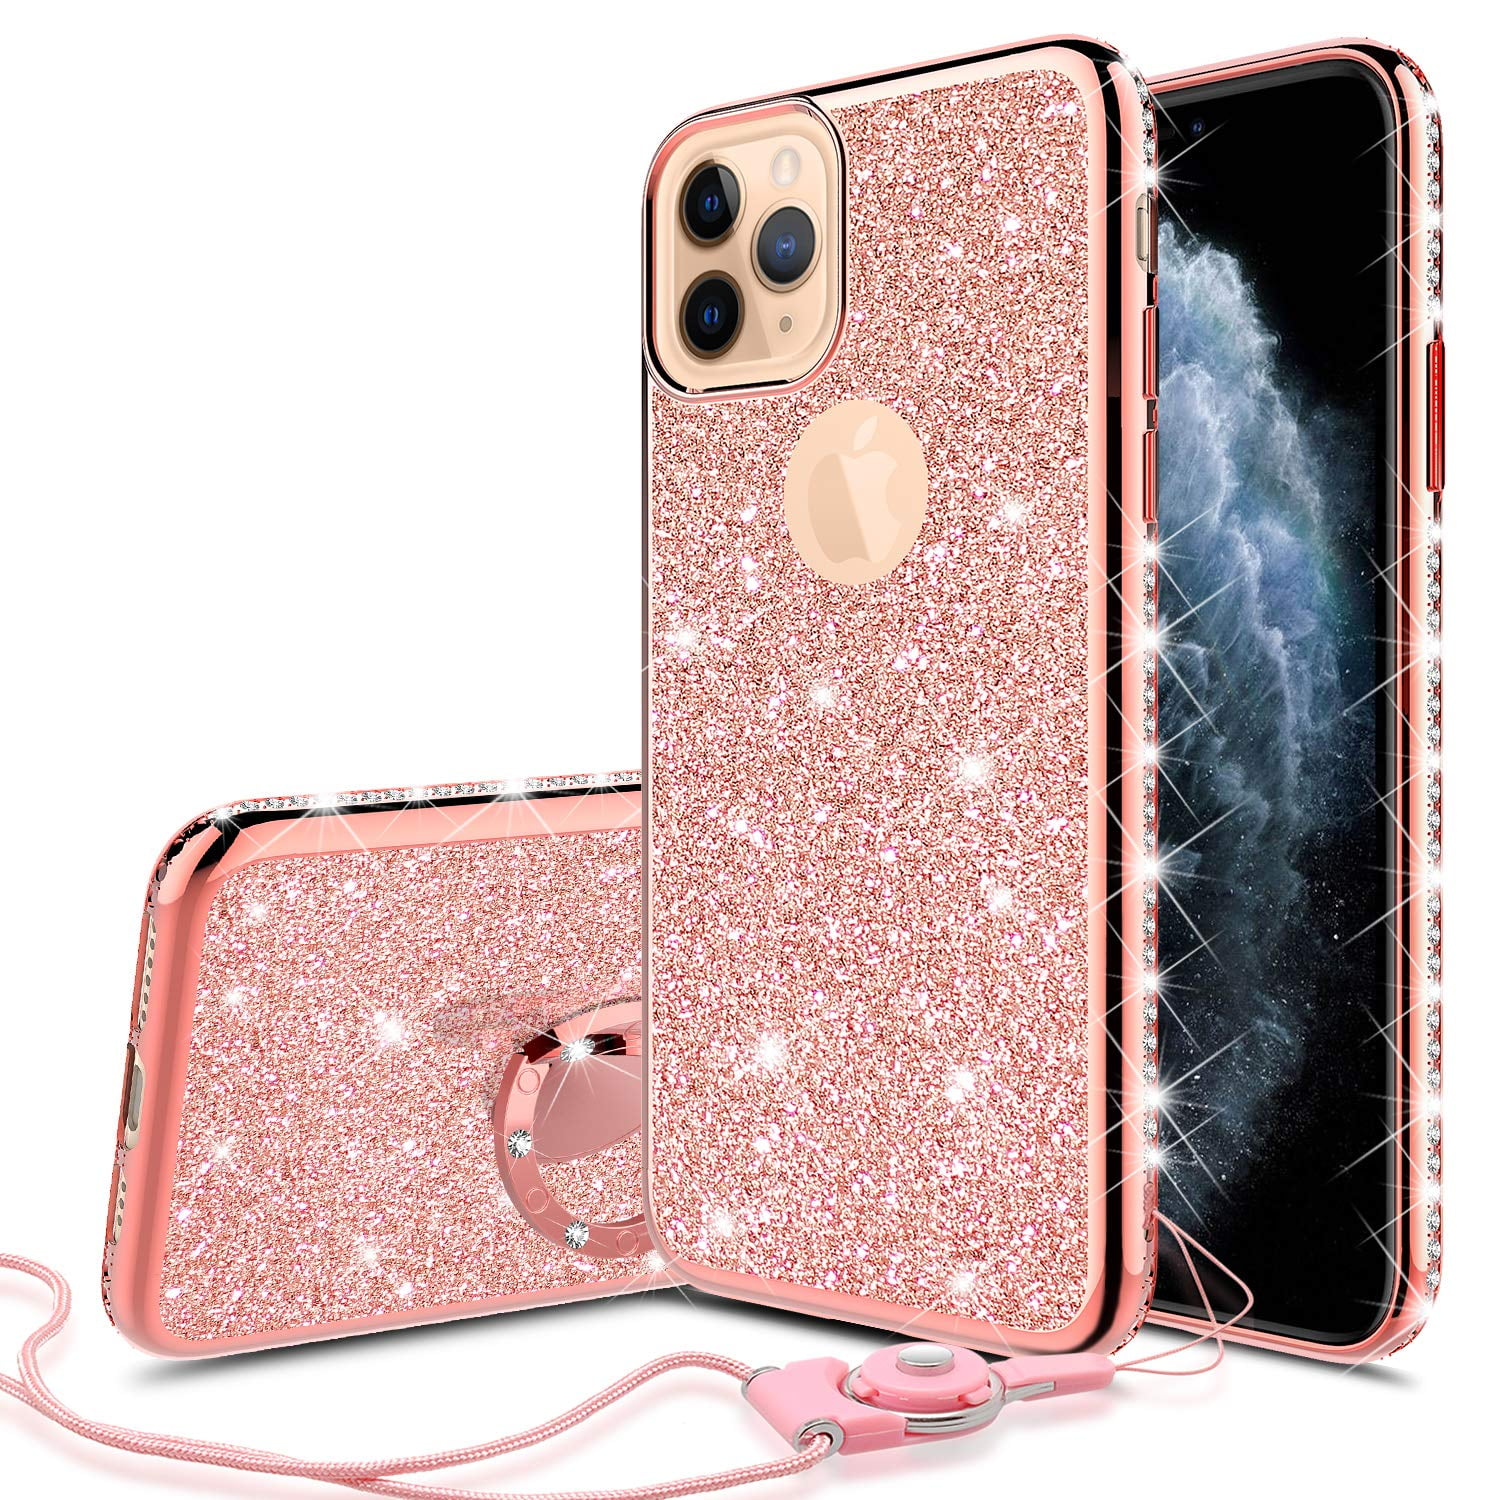 Glitter Cute Phone Case Girls Kickstand for Apple iPhone 11 Pro Max  Case,Bling Diamond Rhinestone Bumper Ring Stand Thin Soft Sparkly Case for  iPhone